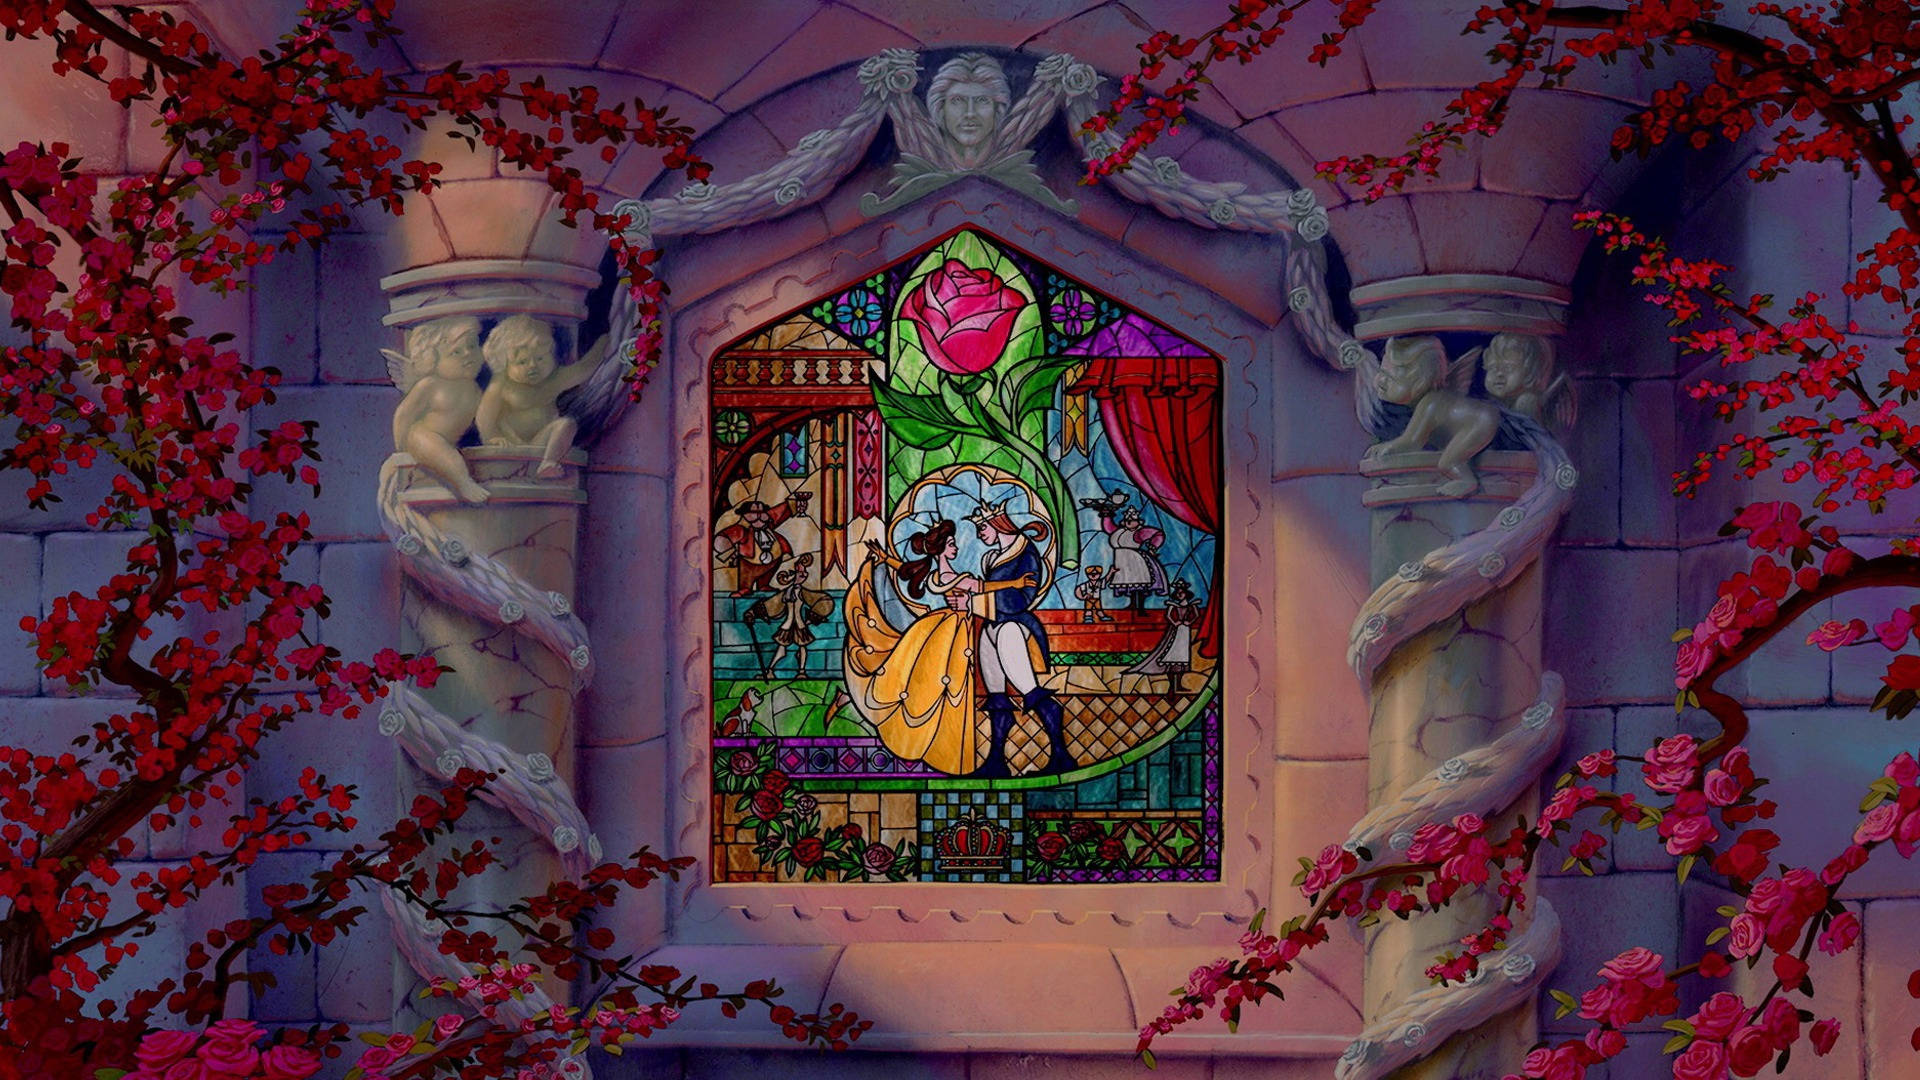 Download Belle And Beast Stained Glass Wallpaper